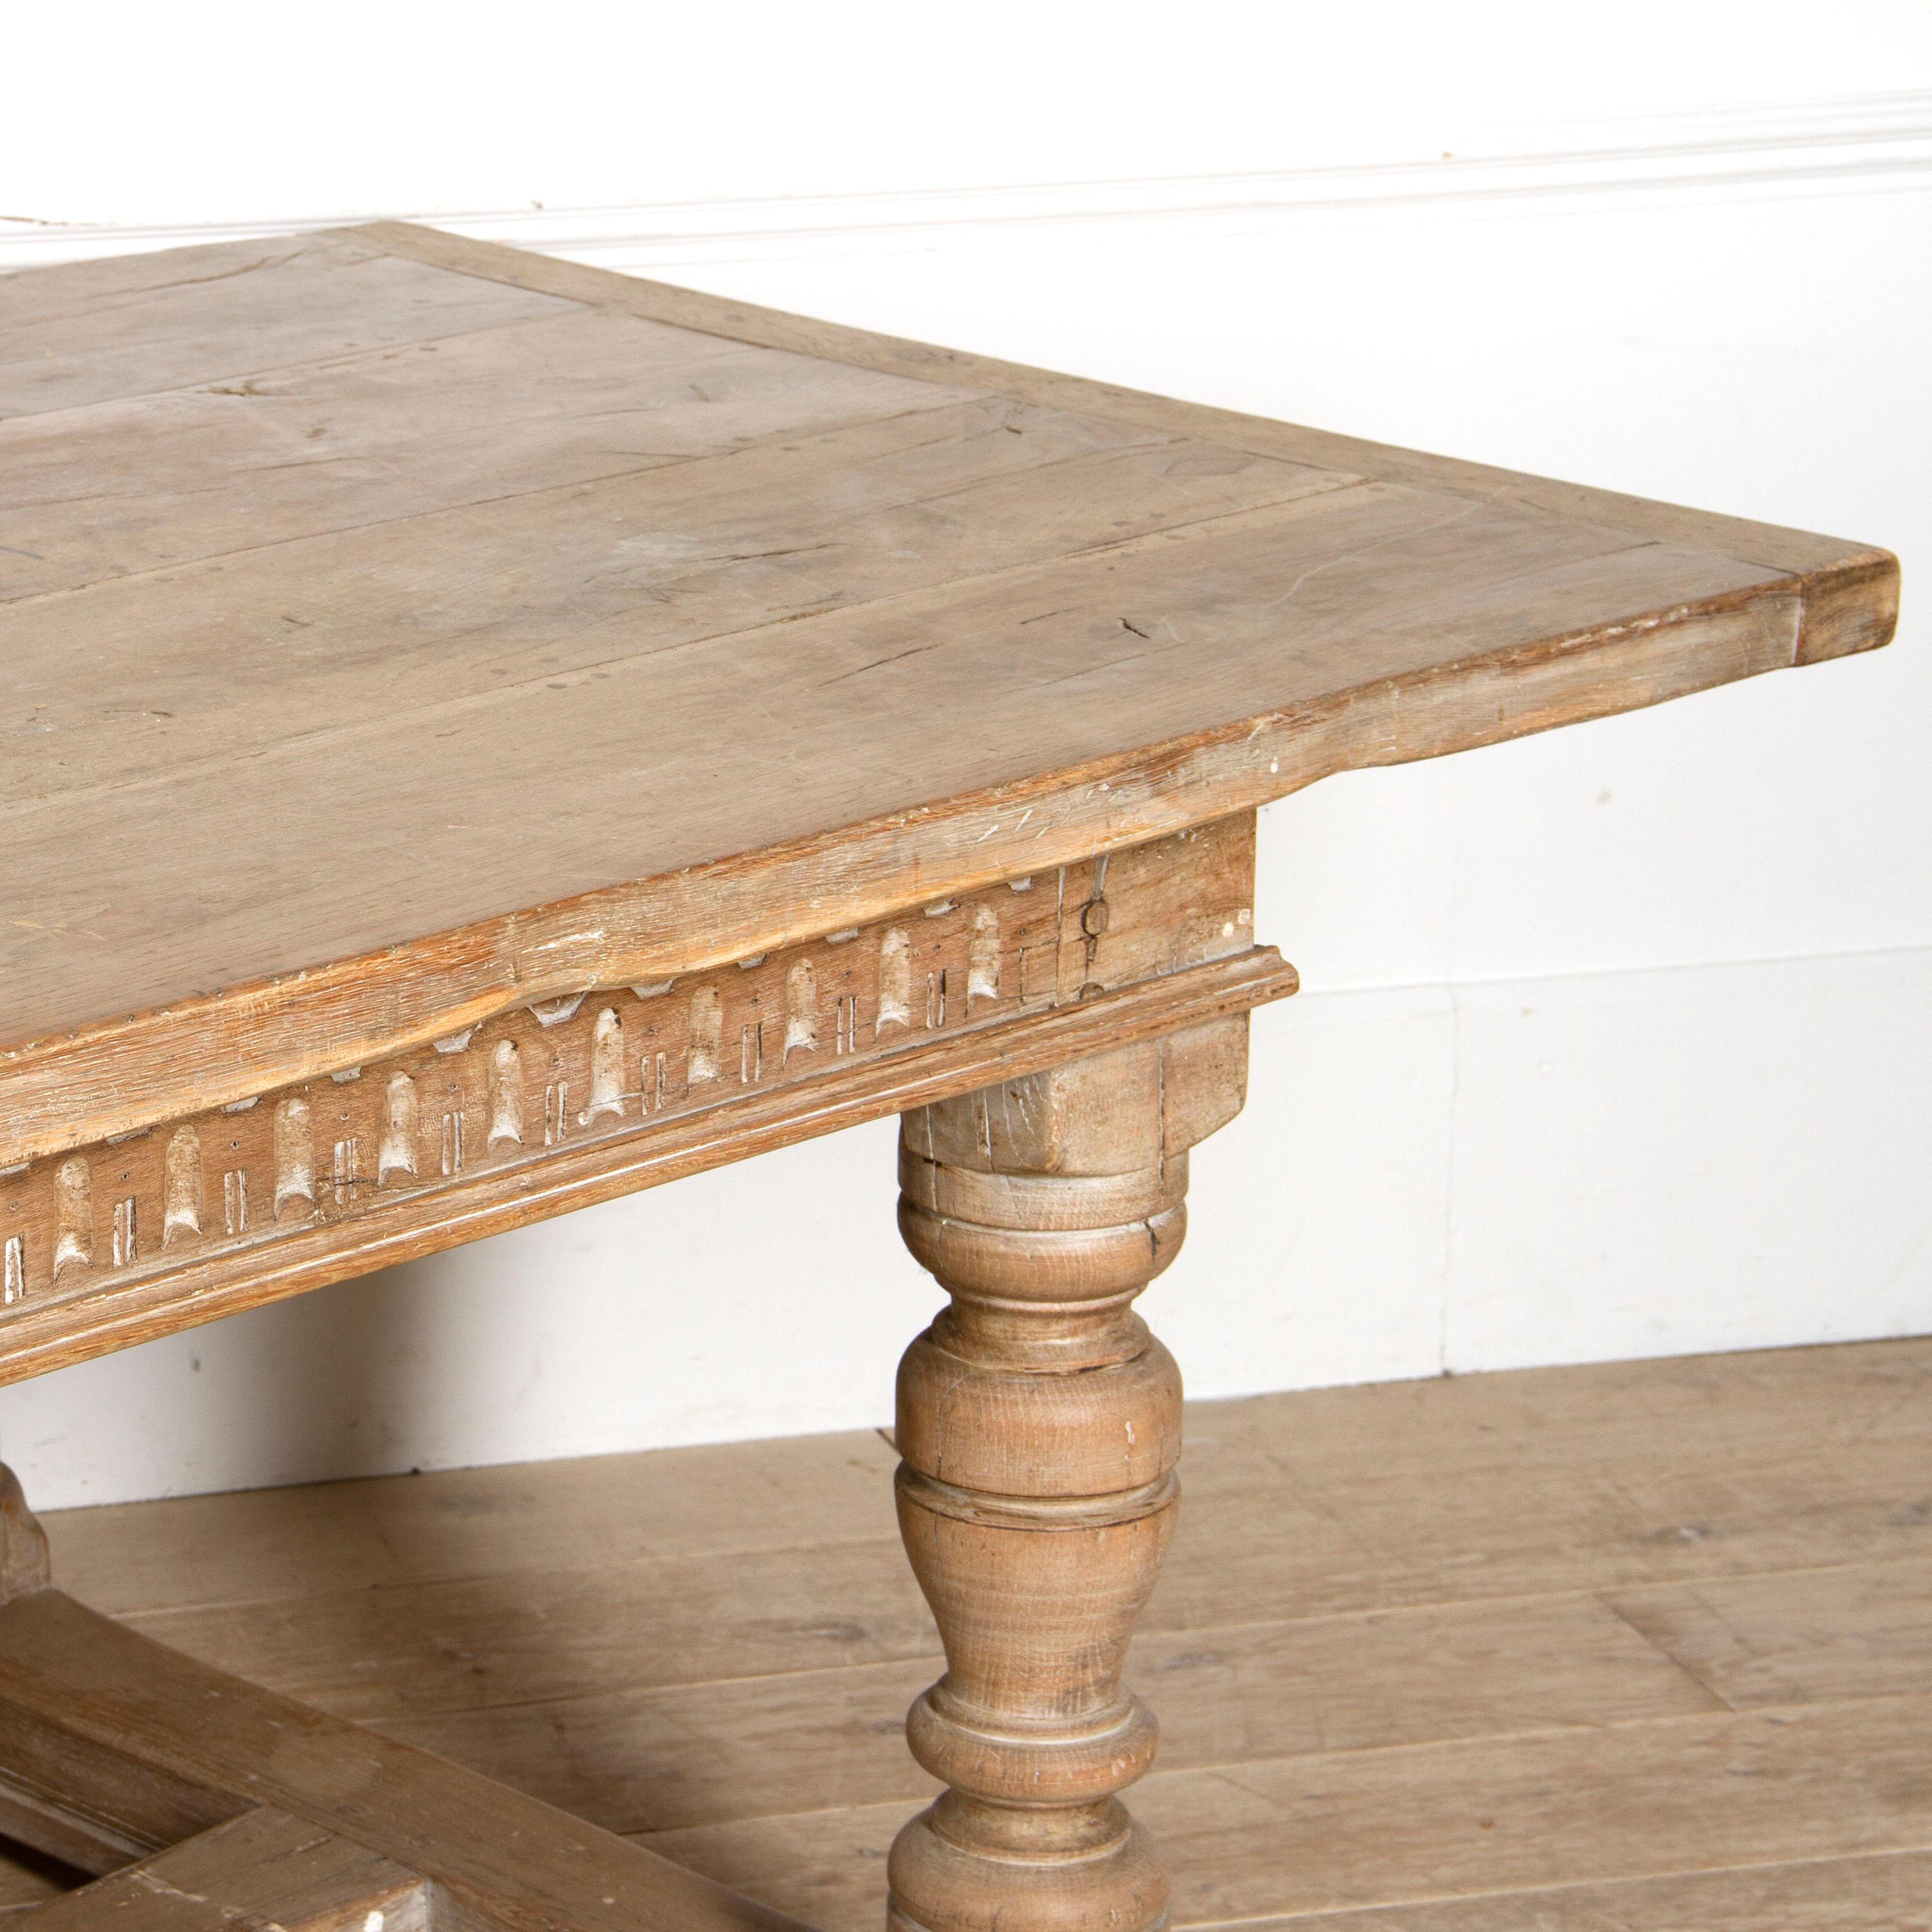 Impressive English 'Arts & Crafts' refectory table. 

This substantial table is comprised of solid oak with turned and baluster legs and stretchers. It also has a heavy peg, dowelled top. 

It has a pleasing and natural 'scrubbed' finish in the